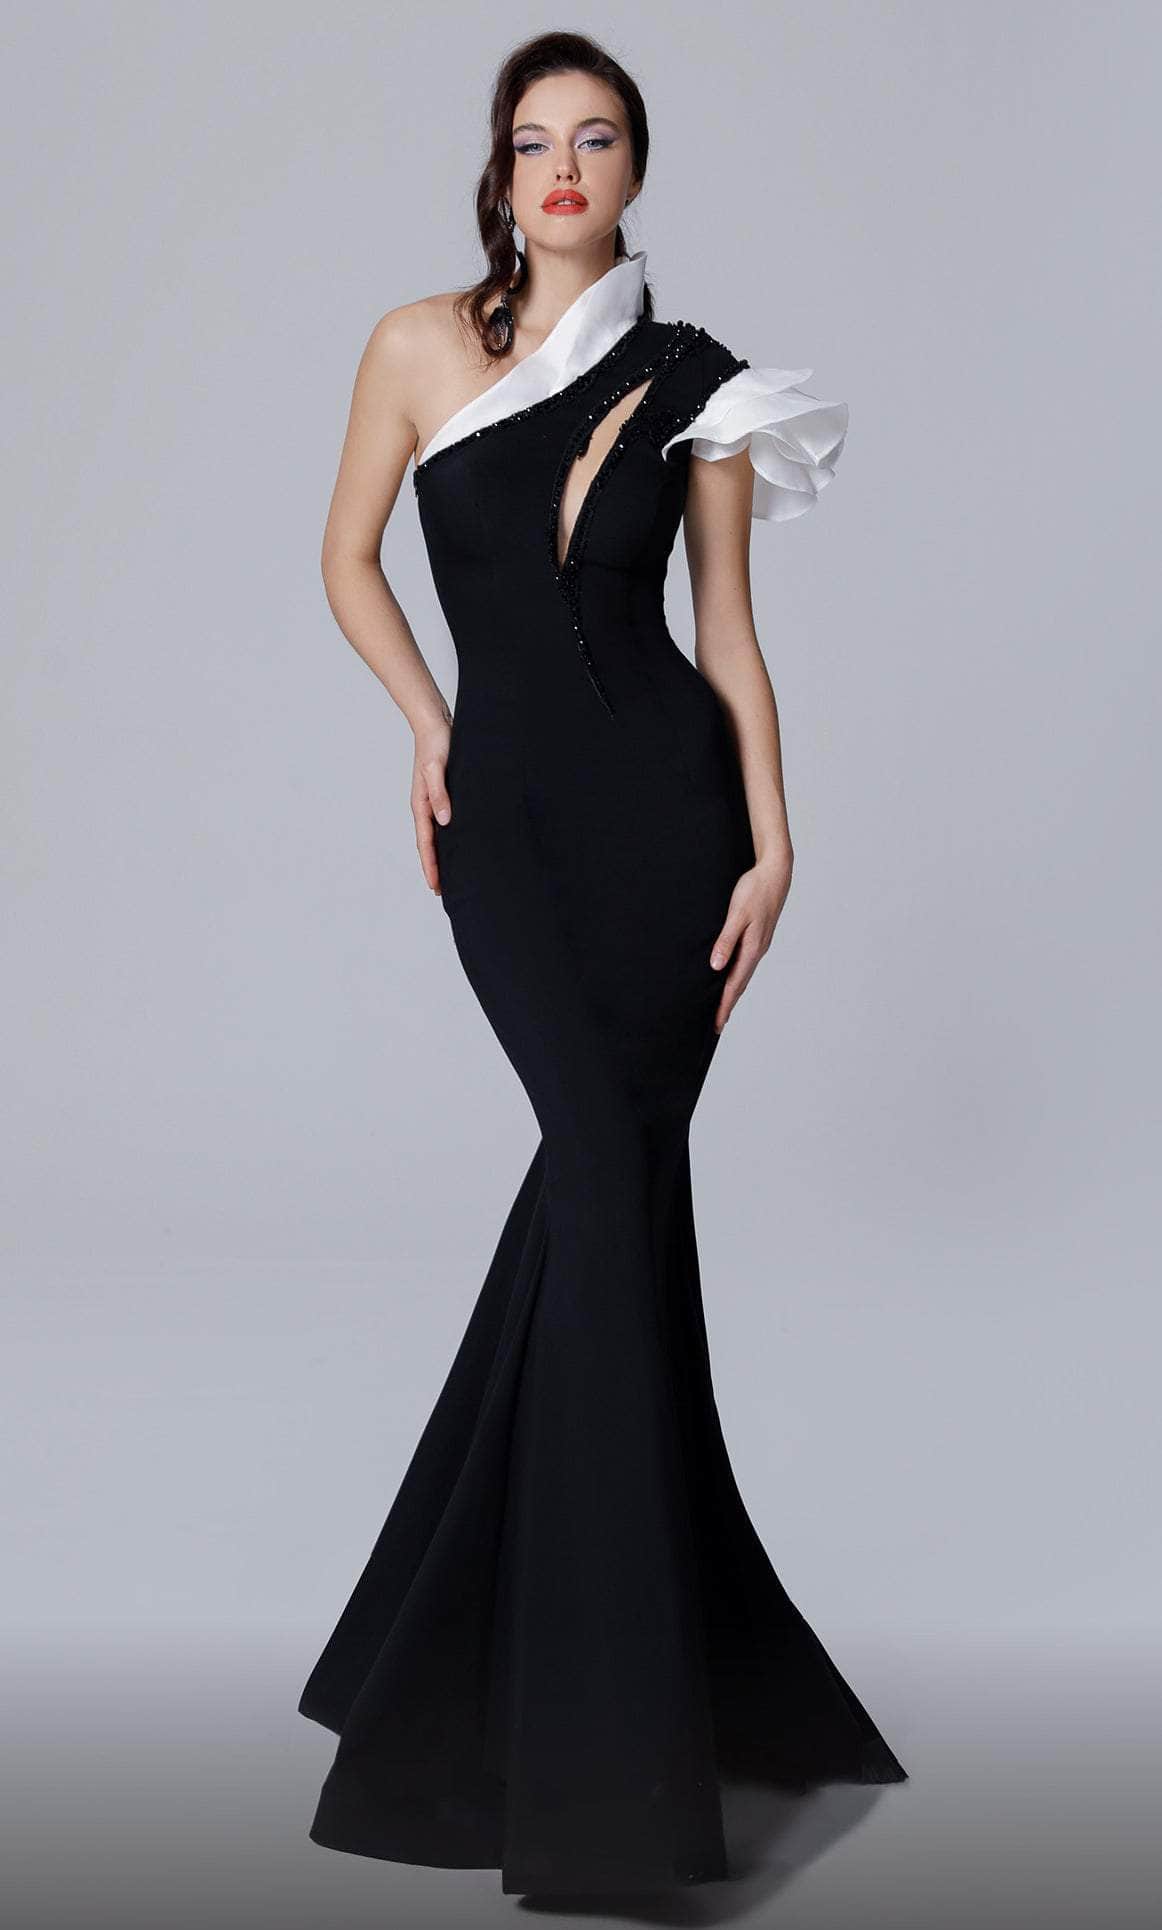 Image of MNM Couture 2736 - Chiseled Mermaid Asymmetrical Dress